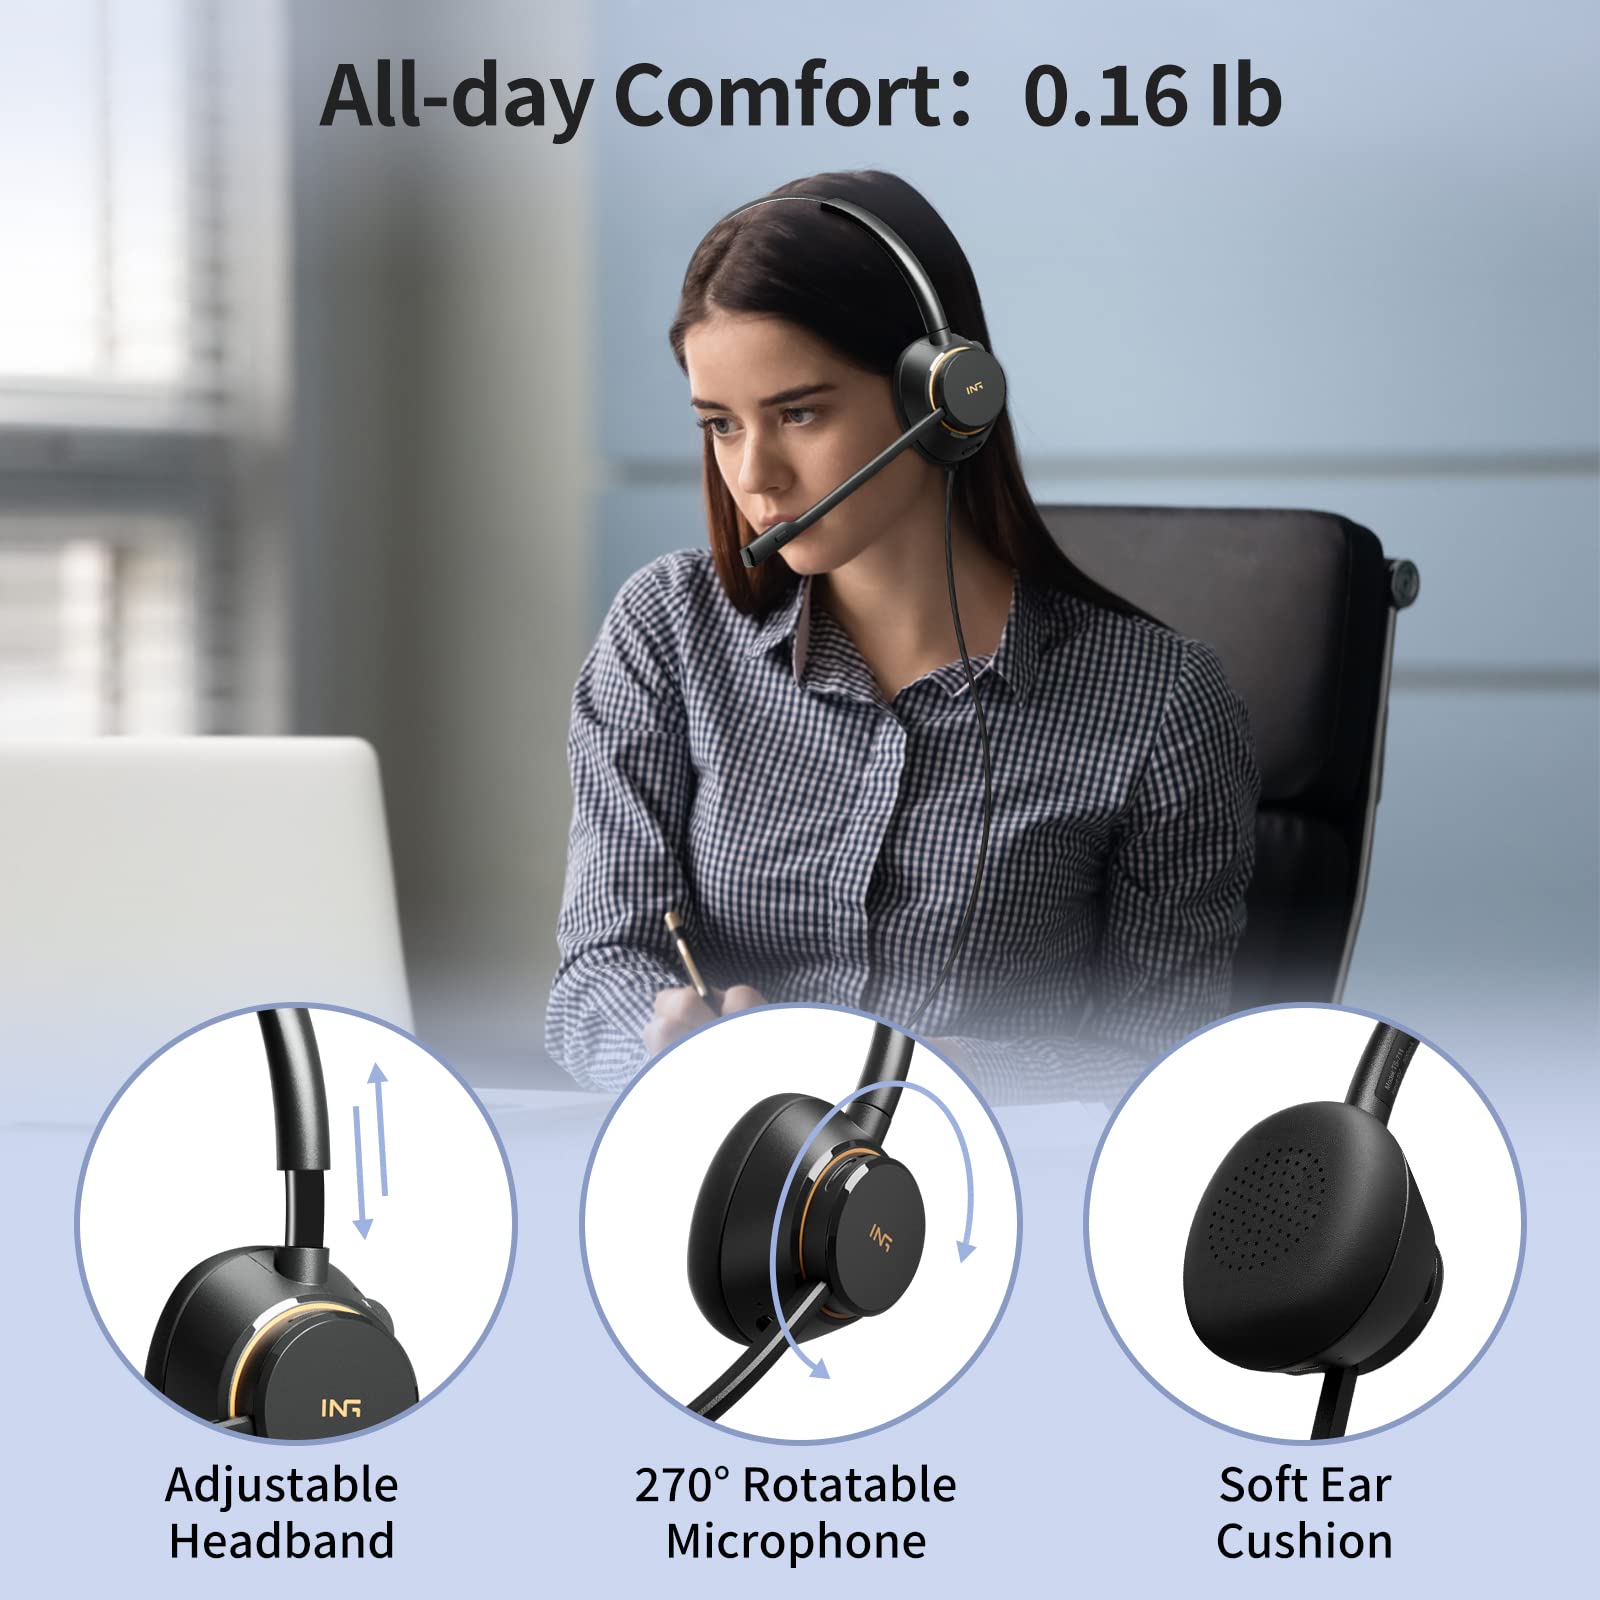 EASARS Single Ear Headset, Wired Headset 3.5mm, Ultra Comfort Phone Headset with Mic for Call Center, Business Skype, Zoom, Office